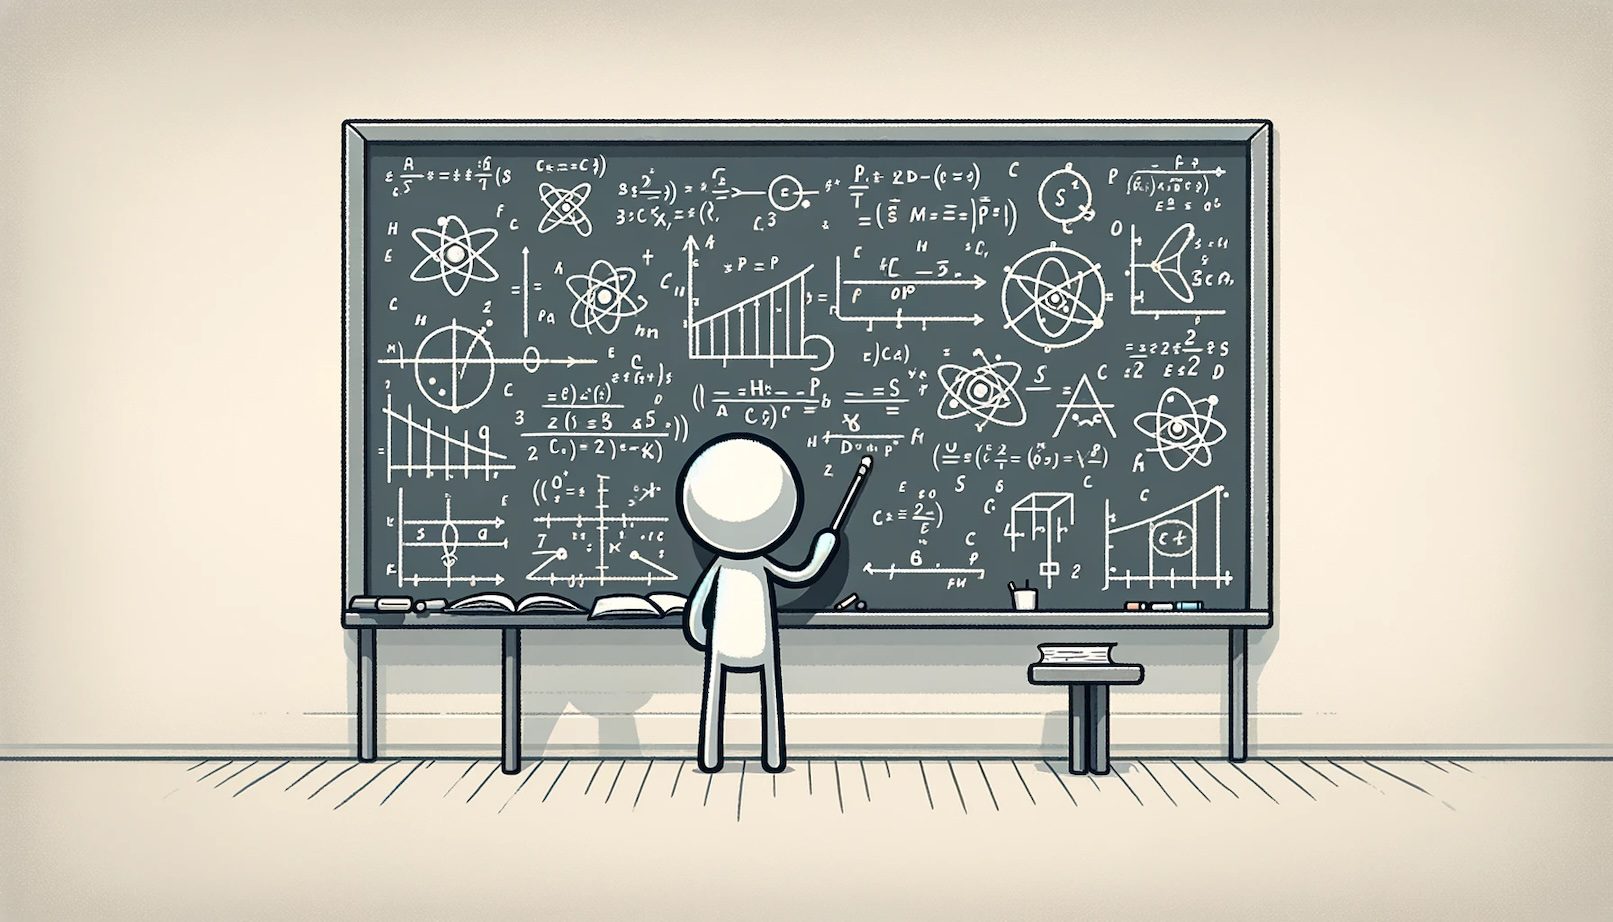 Create a wide rectangular image featuring a stickman figure working on physics concepts. The stickman should be depicted in front of a large chalkboard filled with physics equations, diagrams of atoms, and illustrations of gravitational waves. The stickman, drawn in a simple and clear style, should be actively engaged in solving or writing equations, with a thoughtful expression. The chalkboard should be the central focus, showing the complexity and depth of physics, while the stickman represents the human curiosity and pursuit of understanding these concepts. The background should be a minimalistic representation of a classroom or study space.